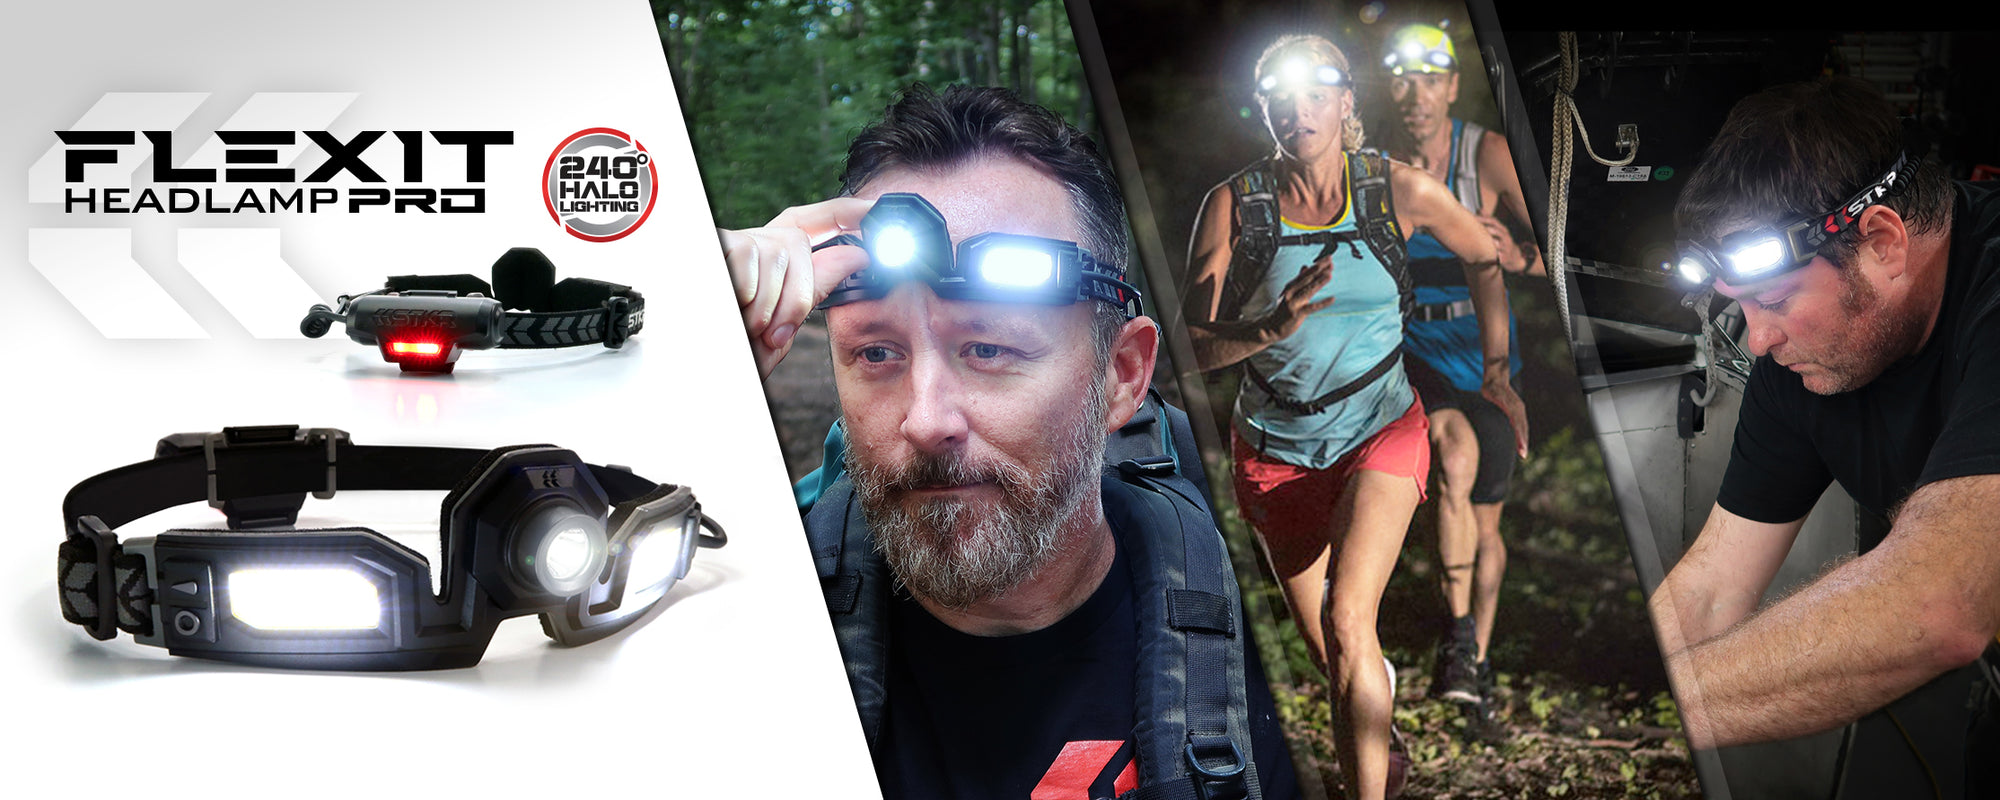 FLEXIT Headlamp Pro 6.5 homepage banner featuring 3 use images and 1 studio panel. Hiking male adjusting the center spotlight, running backpackers wearing headlamps, and finally male working on garage project with his headlamp on. 240 deg halo lighting.. 